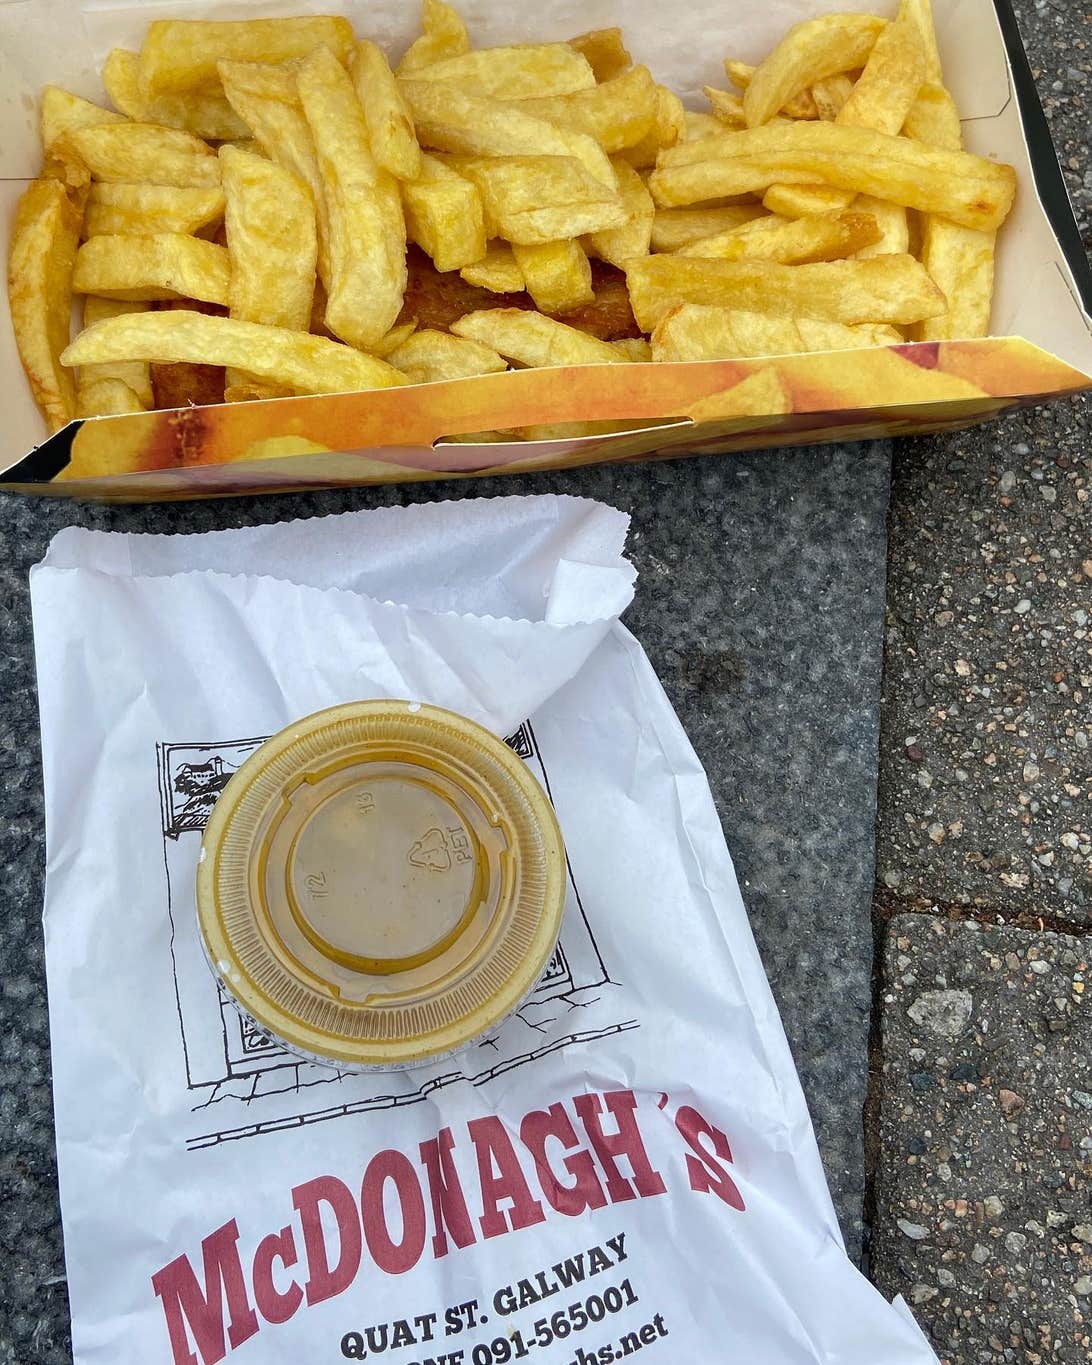 A container of chips with a tub of sauce